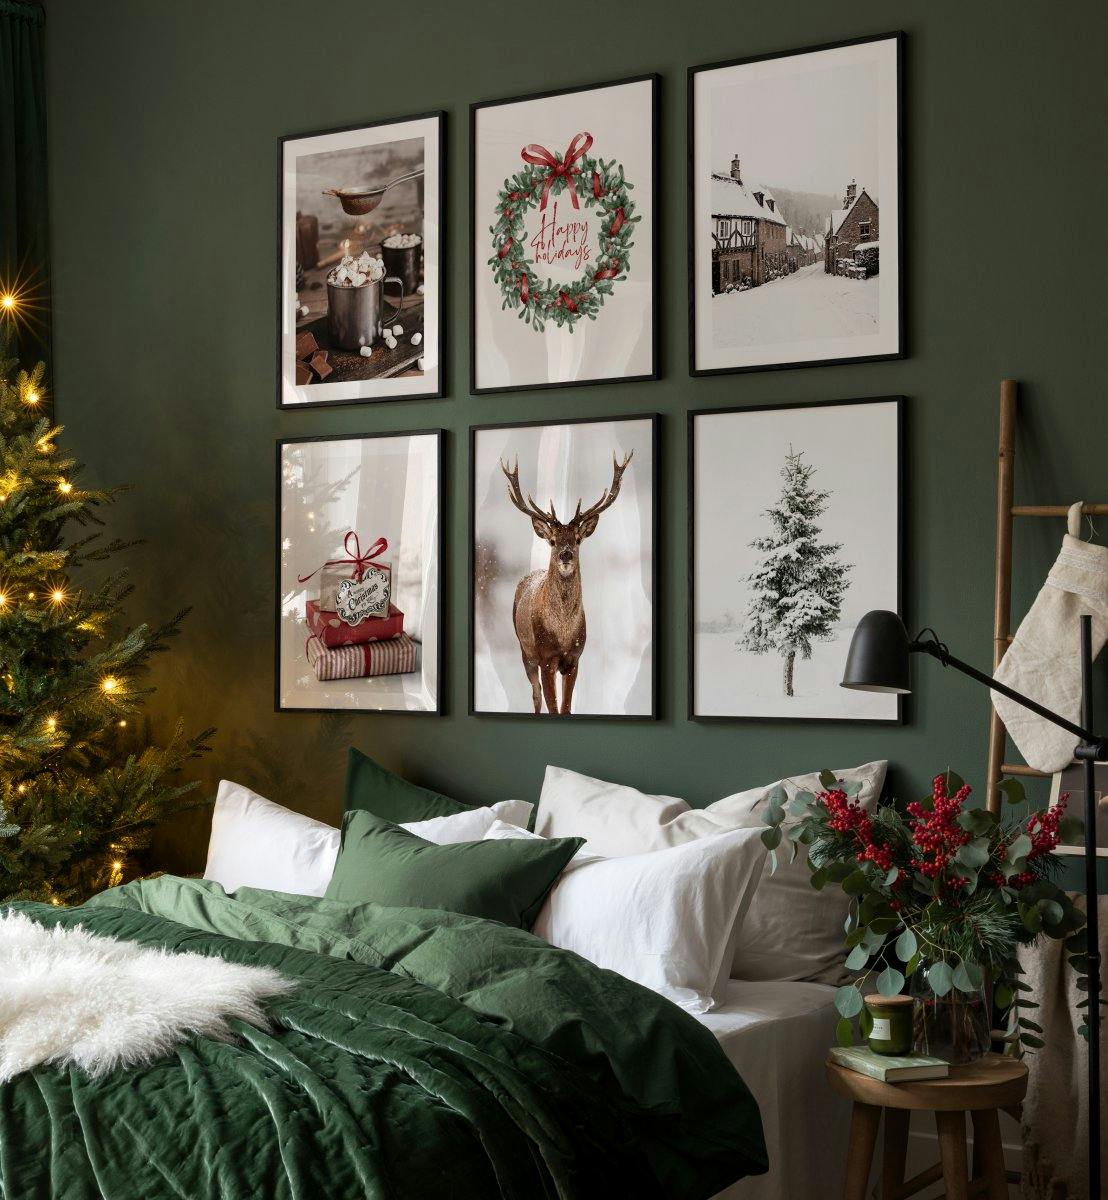 Christmas photographs and illustrations in green, red and brown for a cosy bedroom